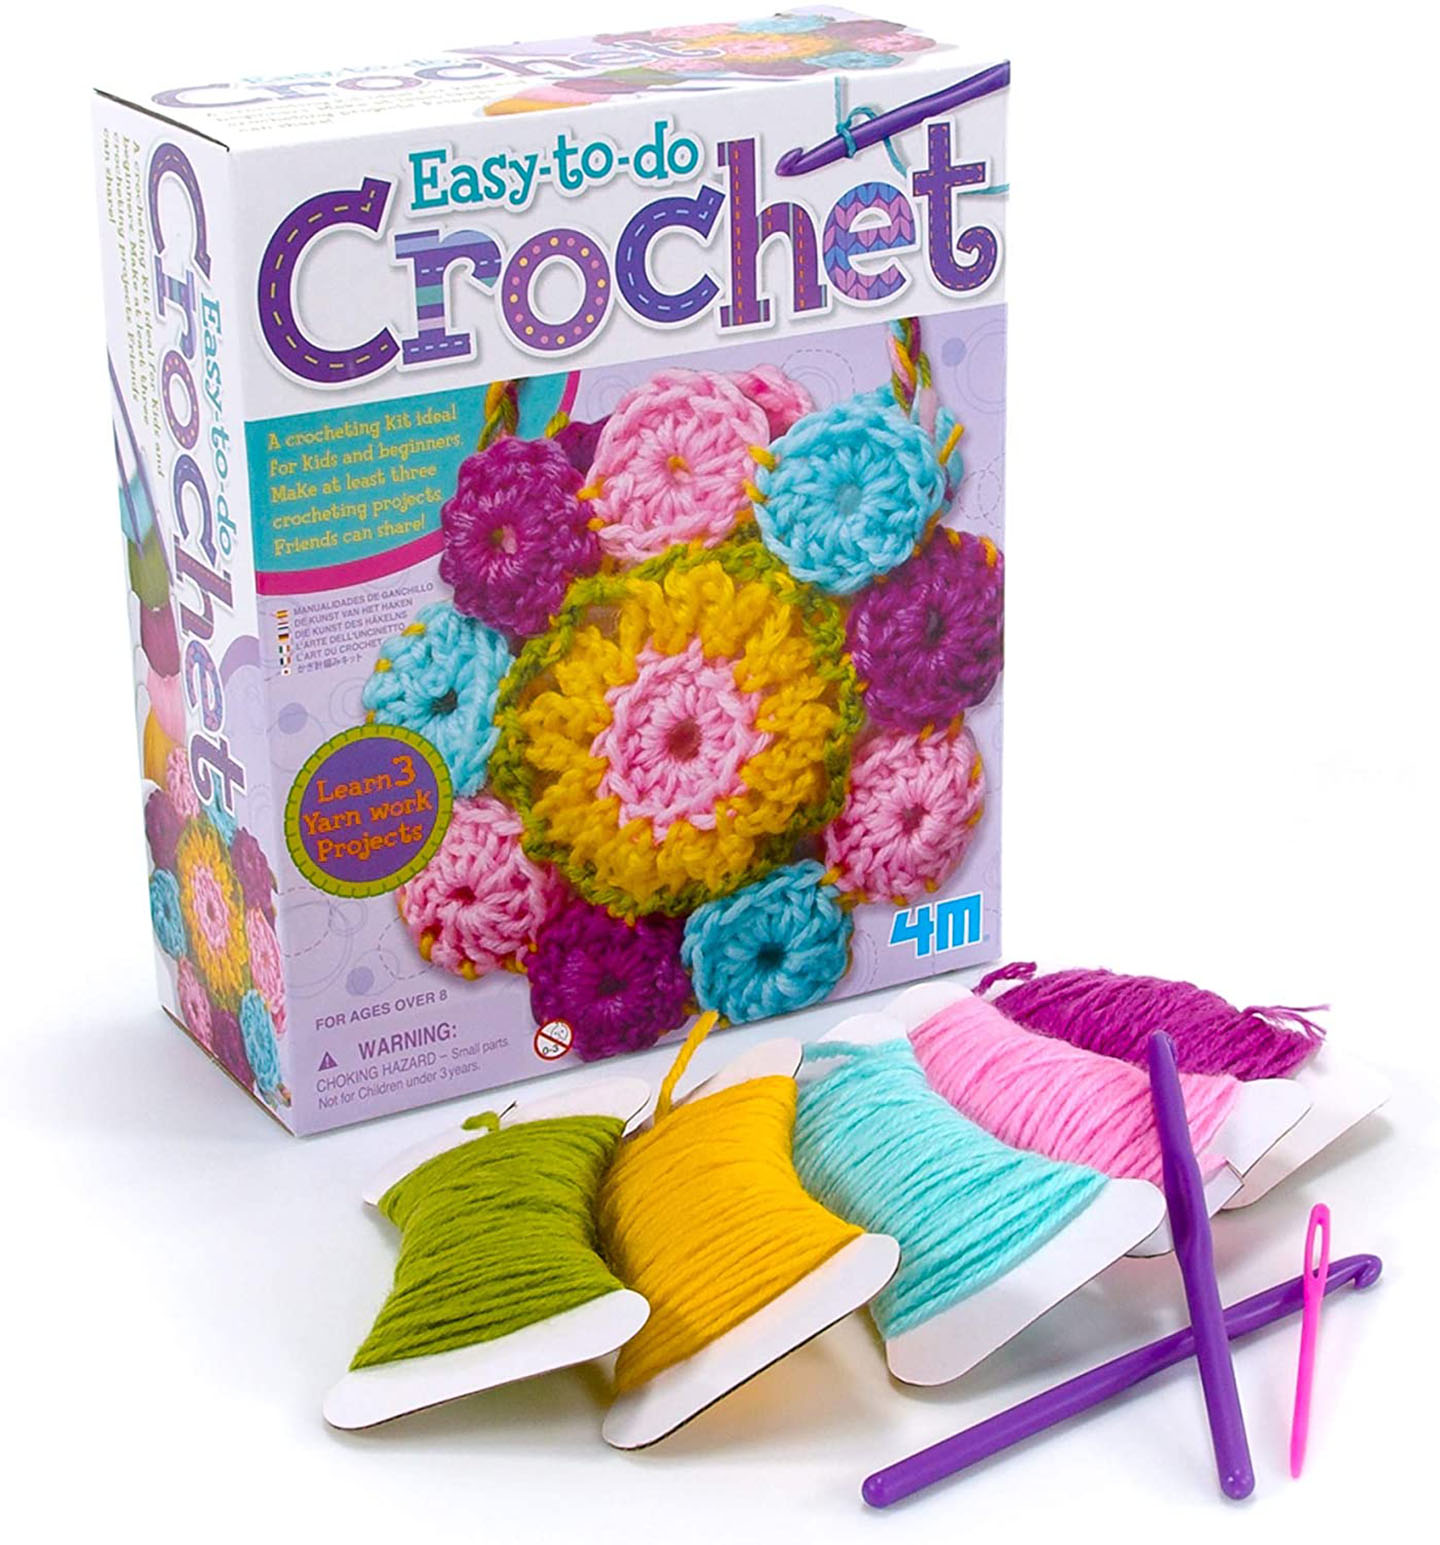 I Taught Myself Crochet Kit for Beginners - Crochet Kits at Weekend Kits